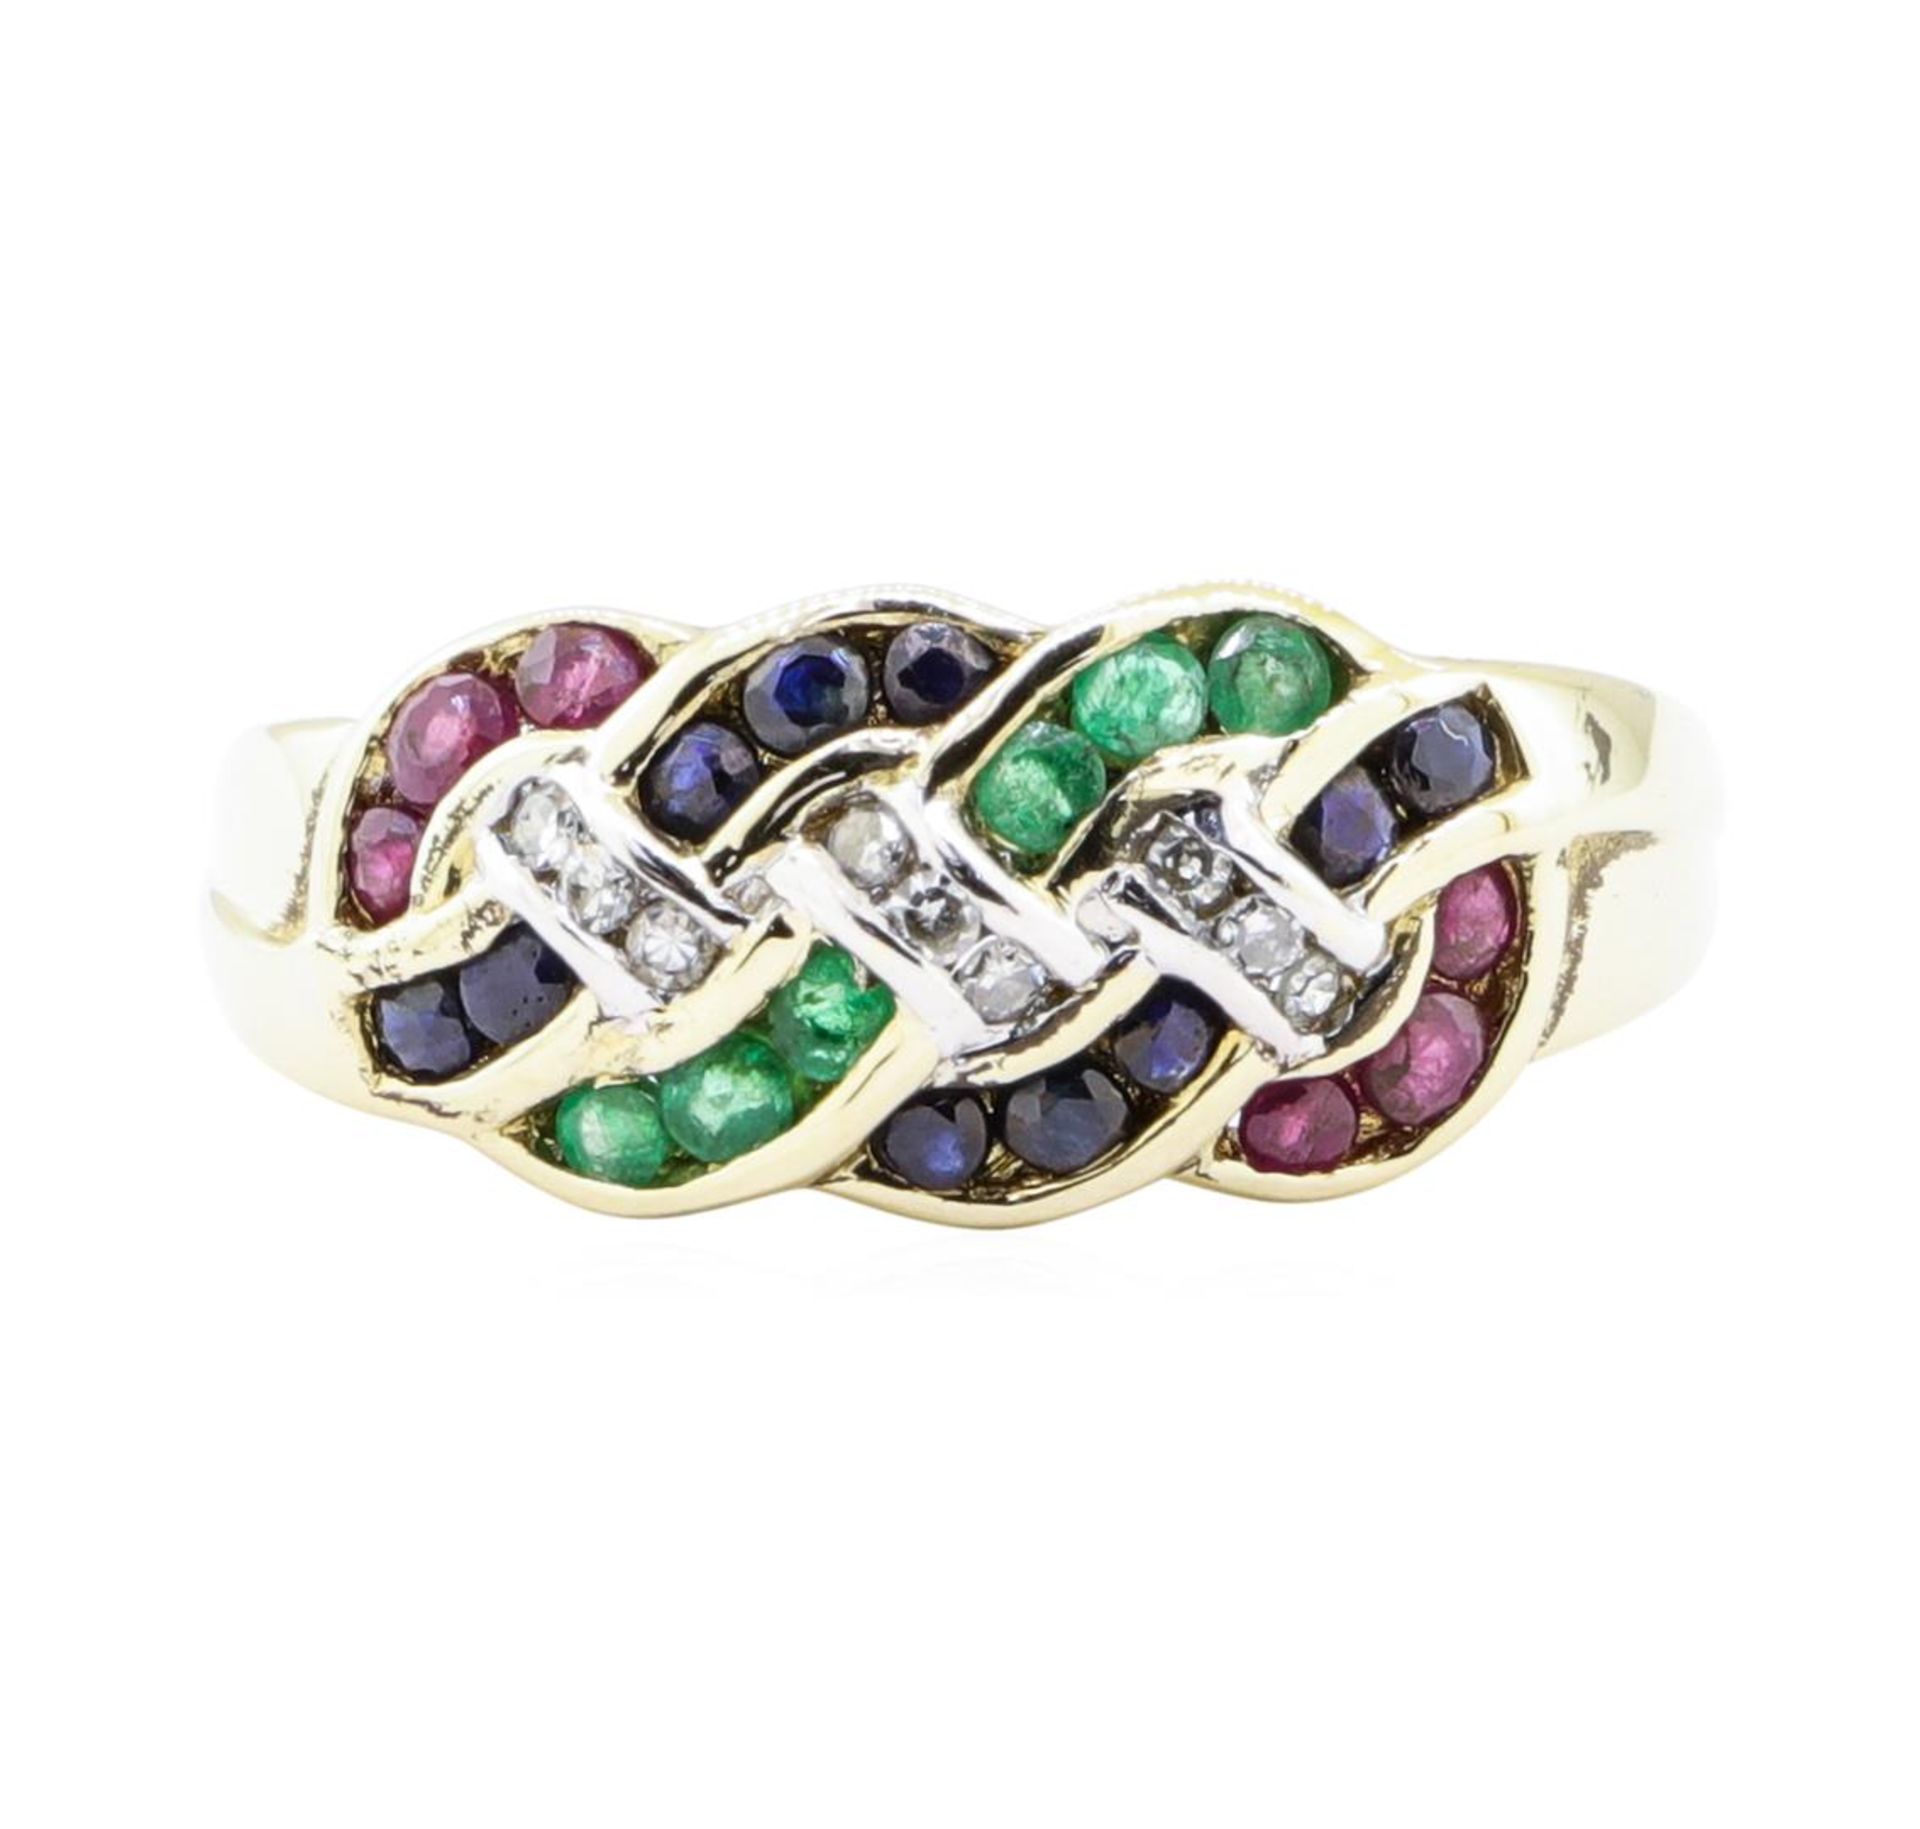 1.38 ctw Multi-colored Gemstone Ring - 14KT Yellow Gold - Image 2 of 6